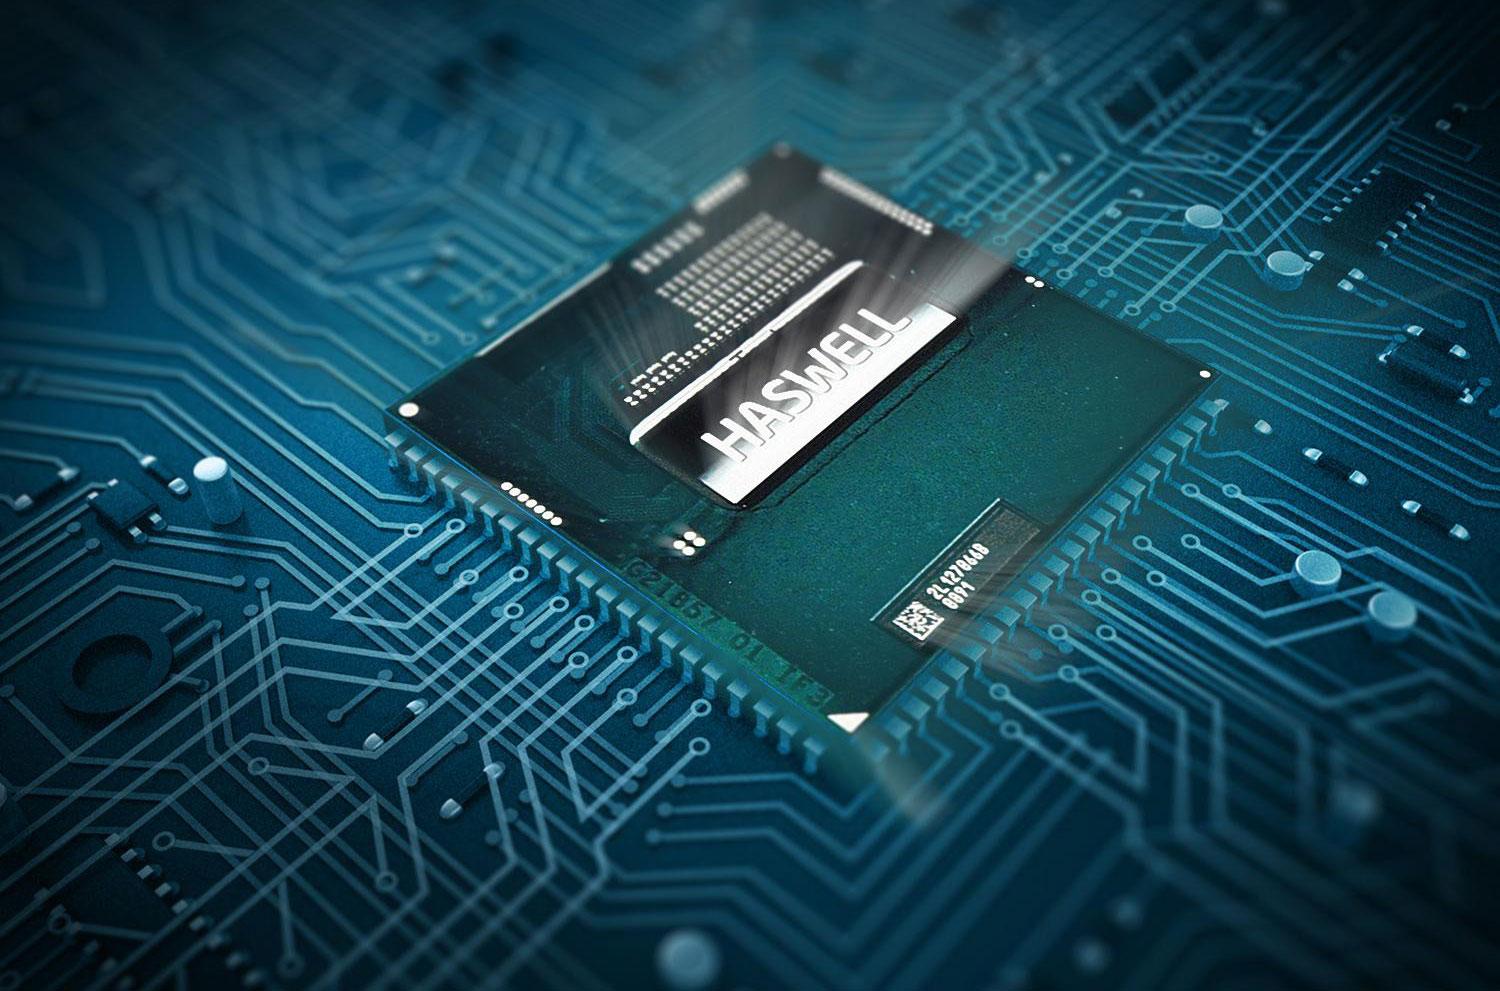 Intel releases new 4th gen “haswell” processors